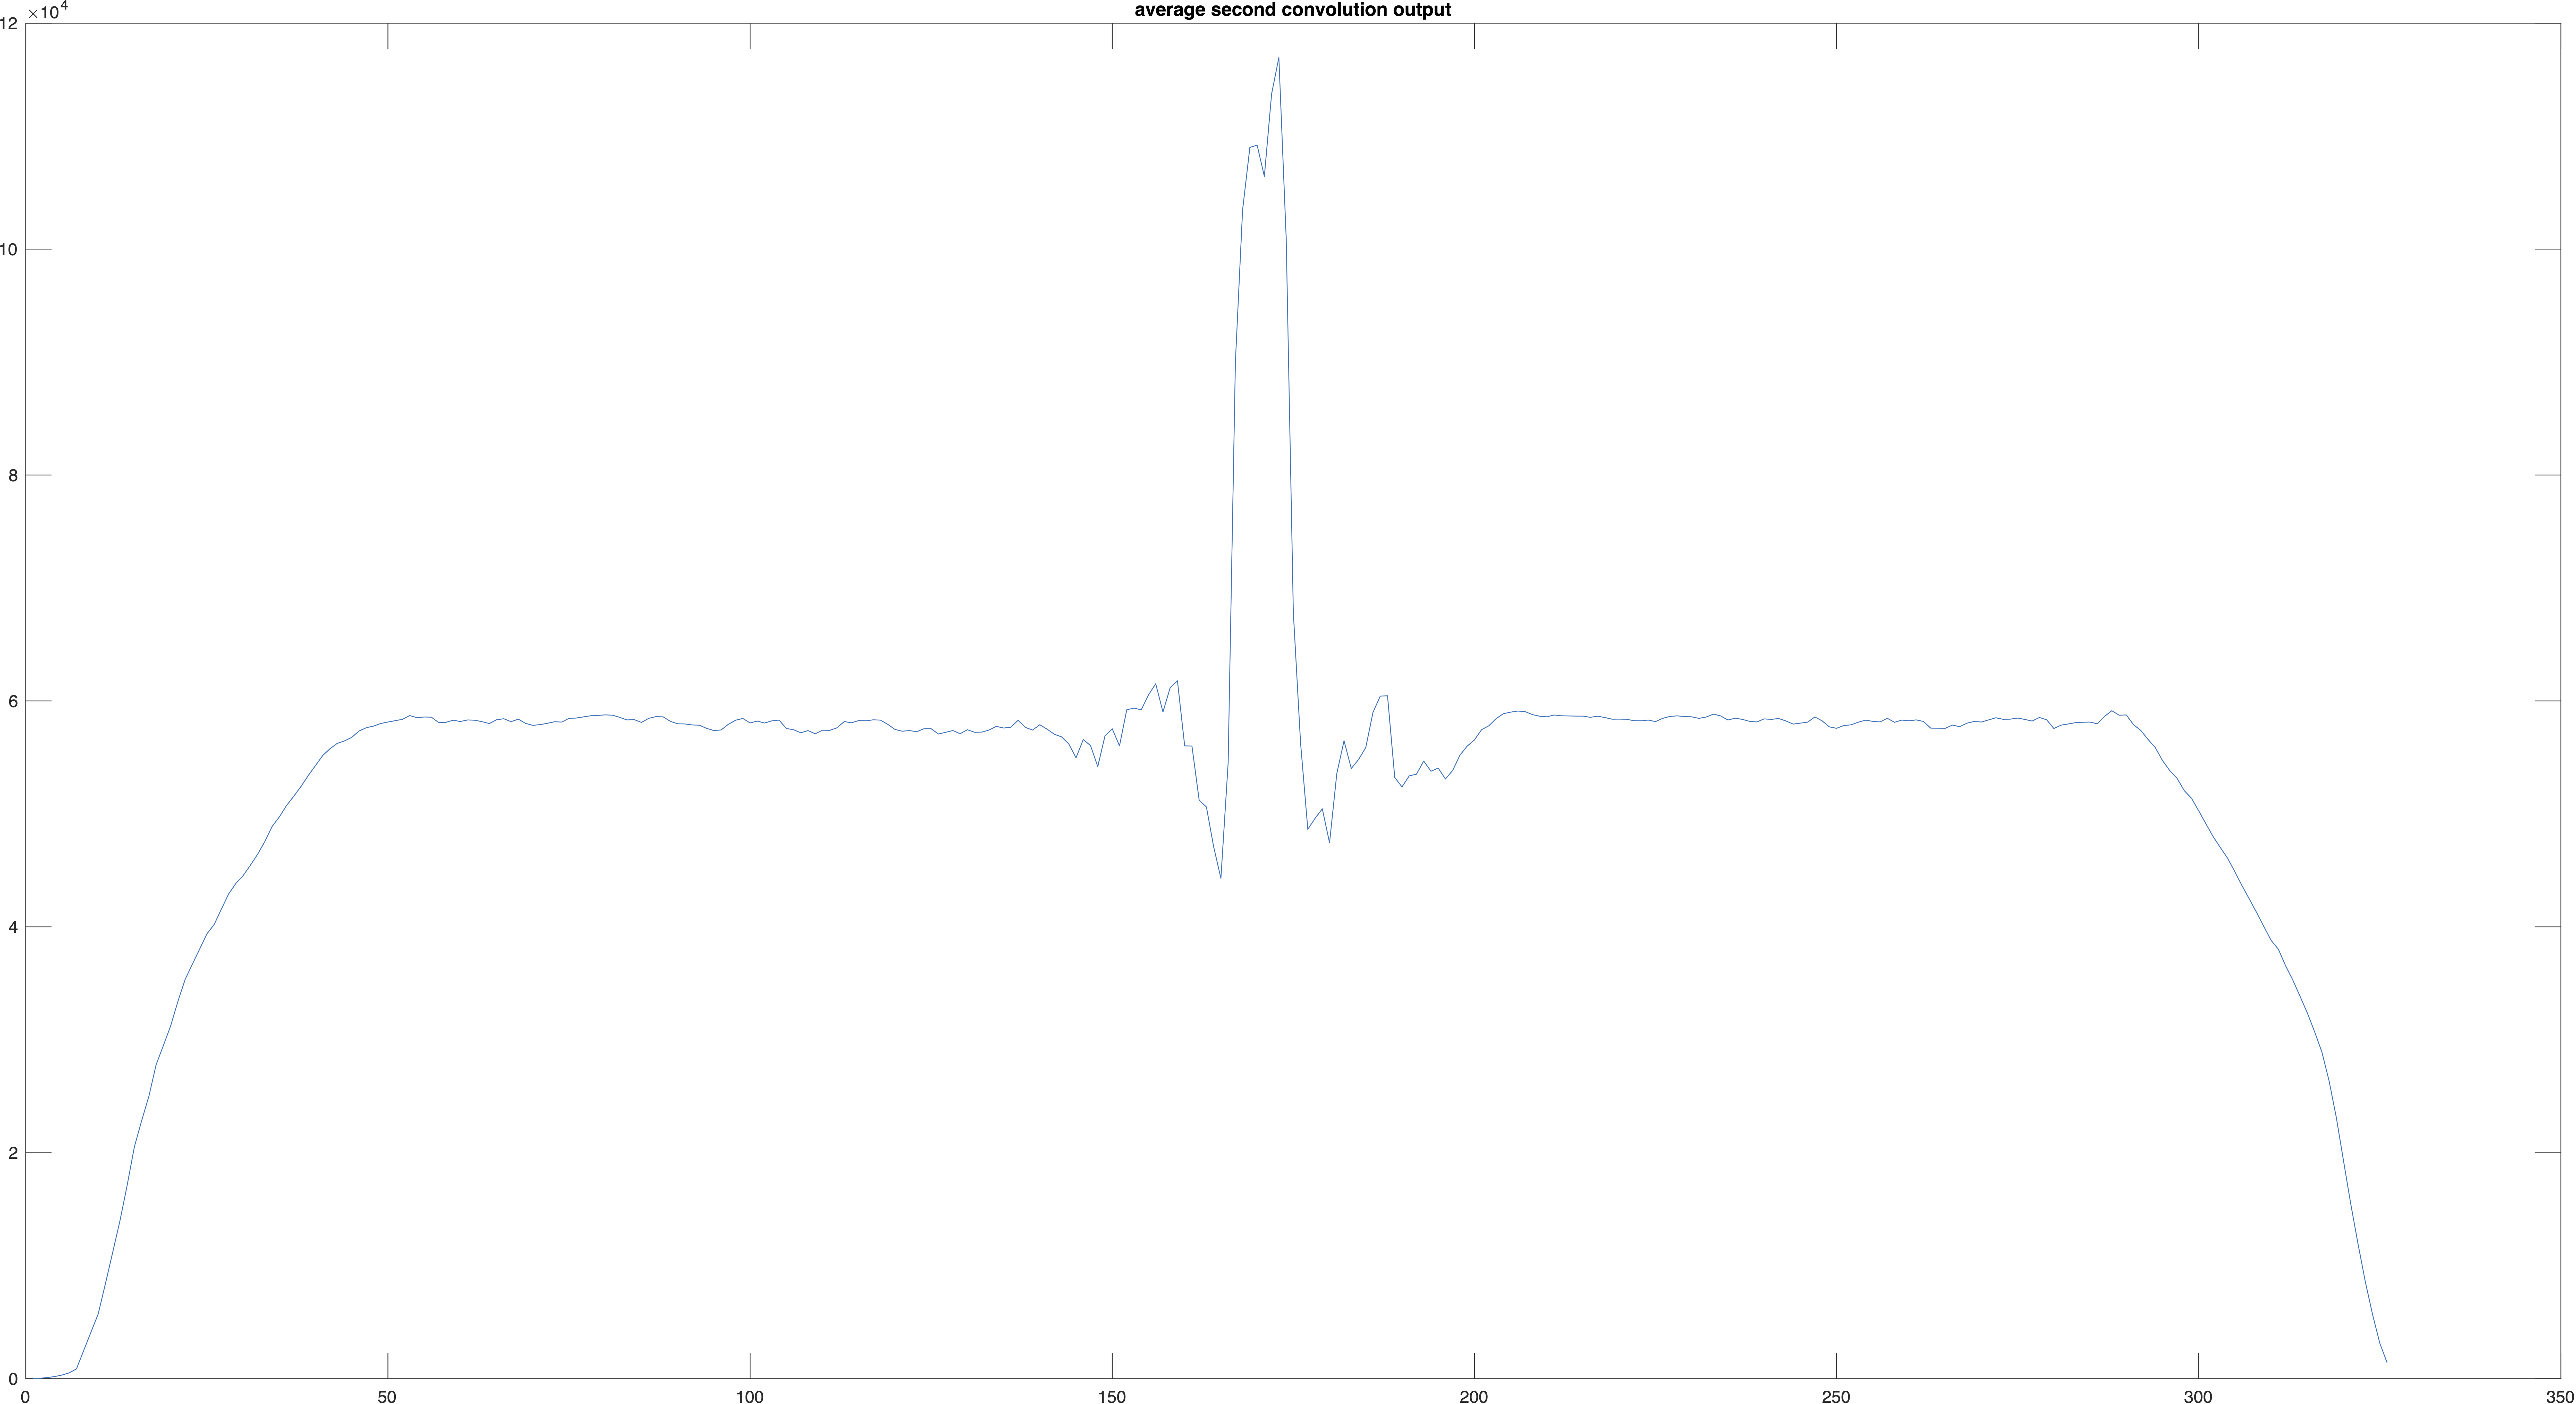 Average second convolution output with gsmTUx12c1; click for full size